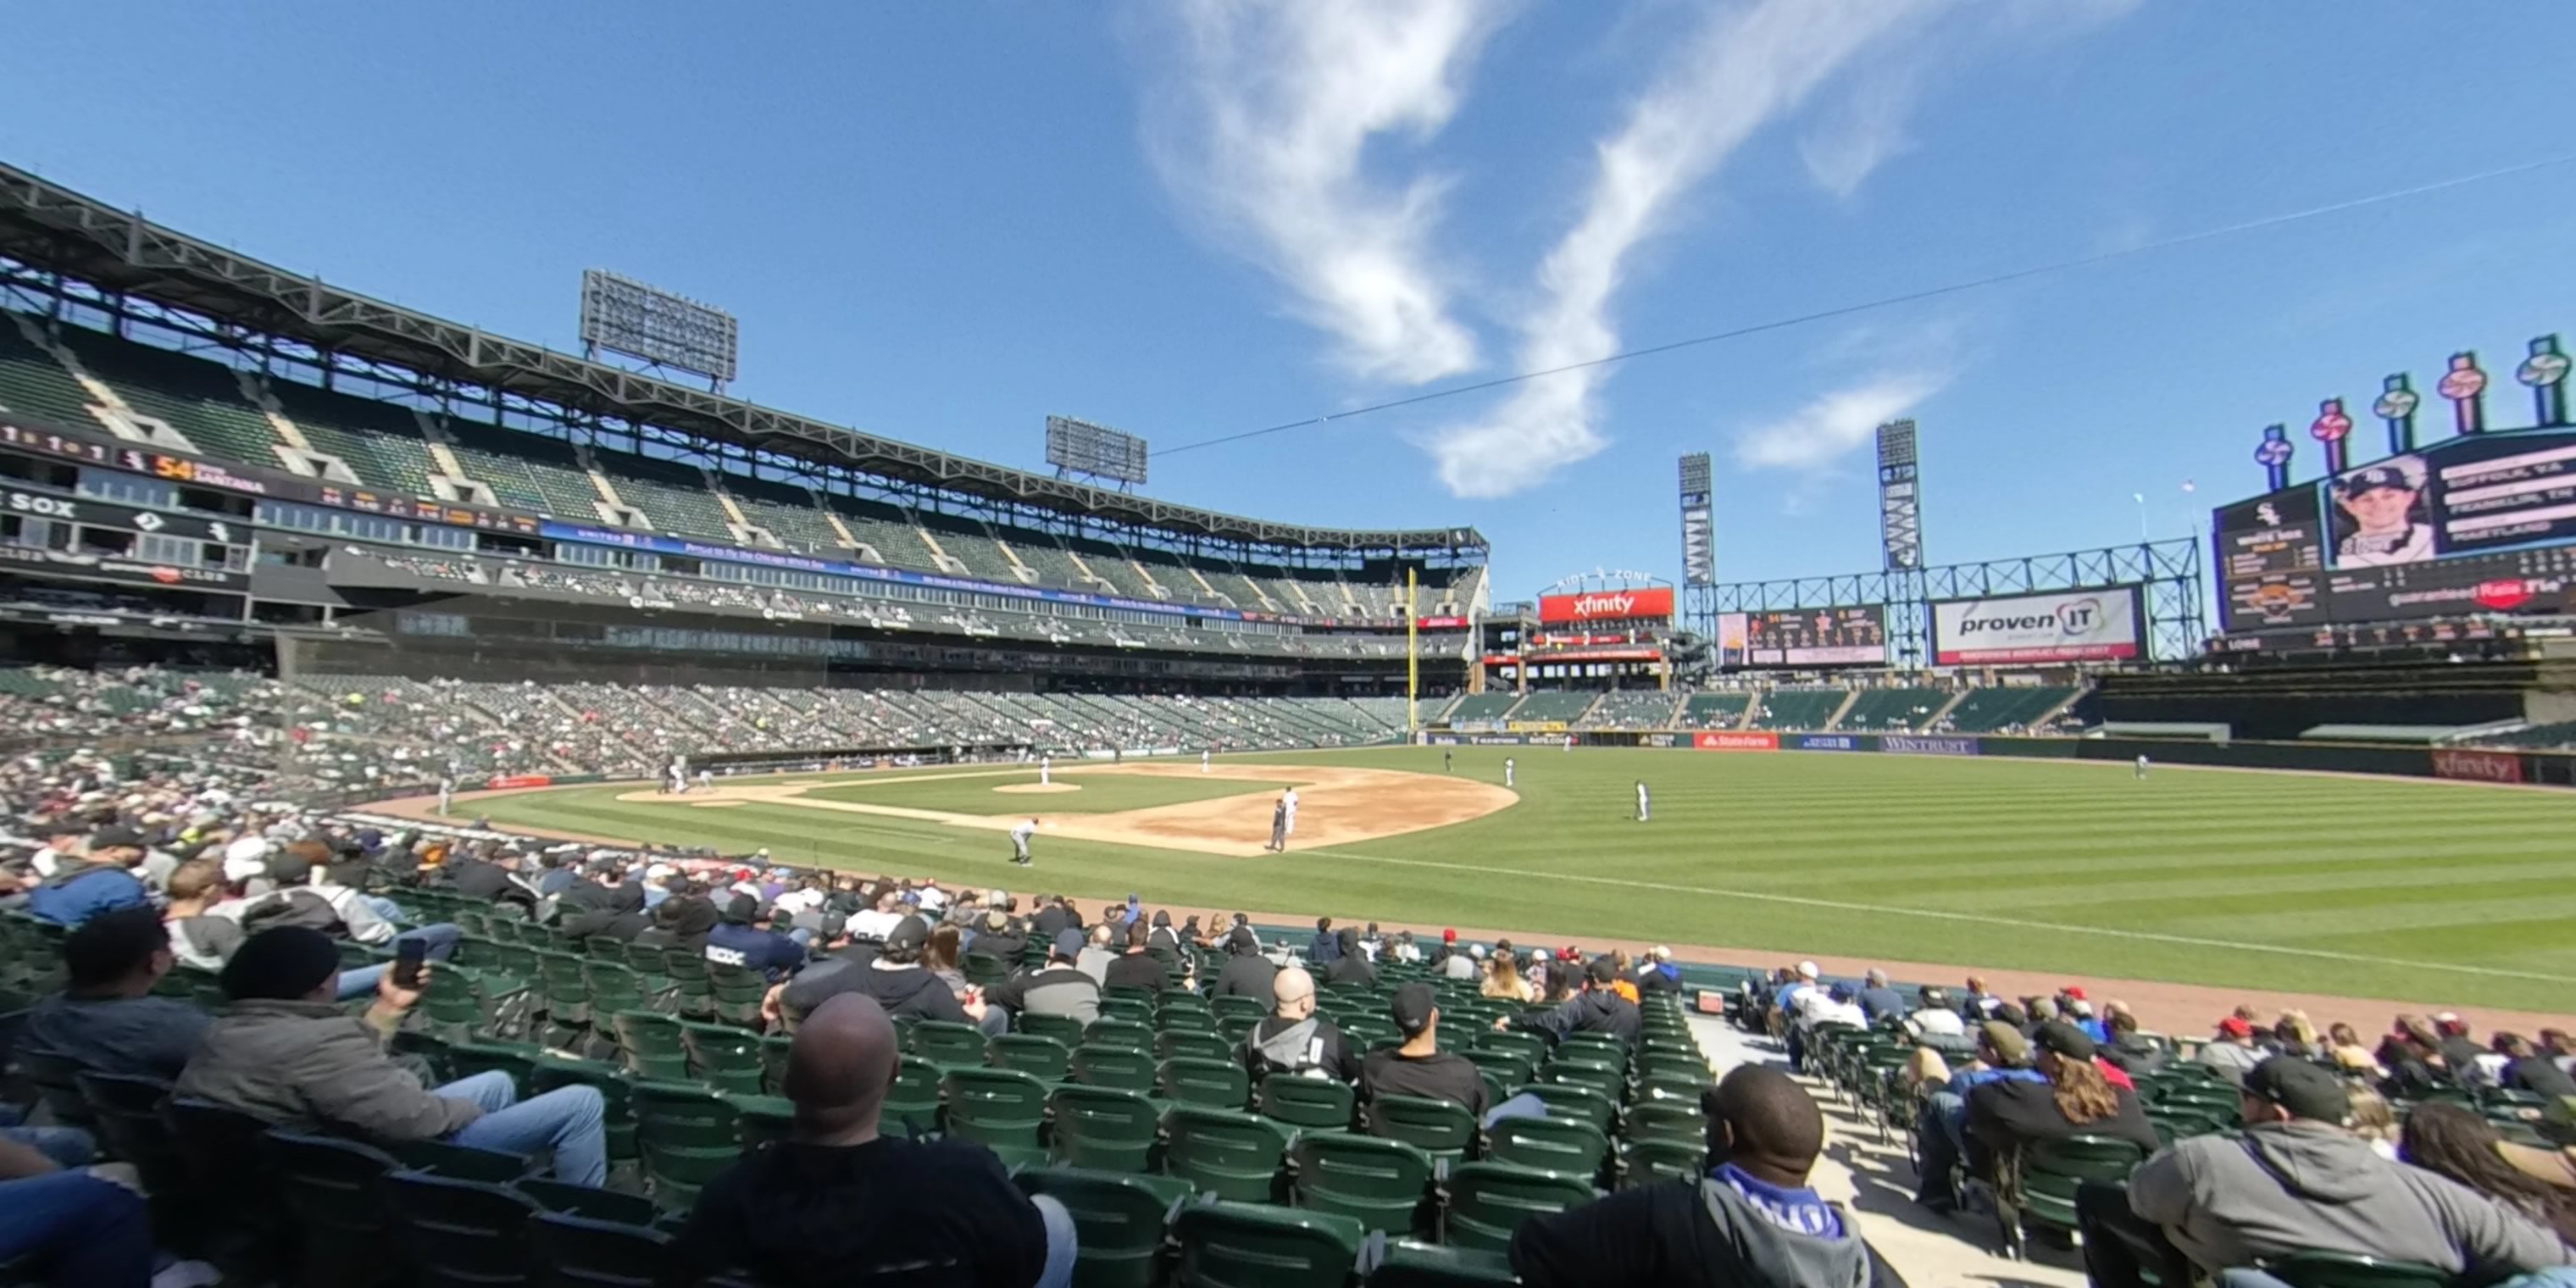 section 118 panoramic seat view  - guaranteed rate field